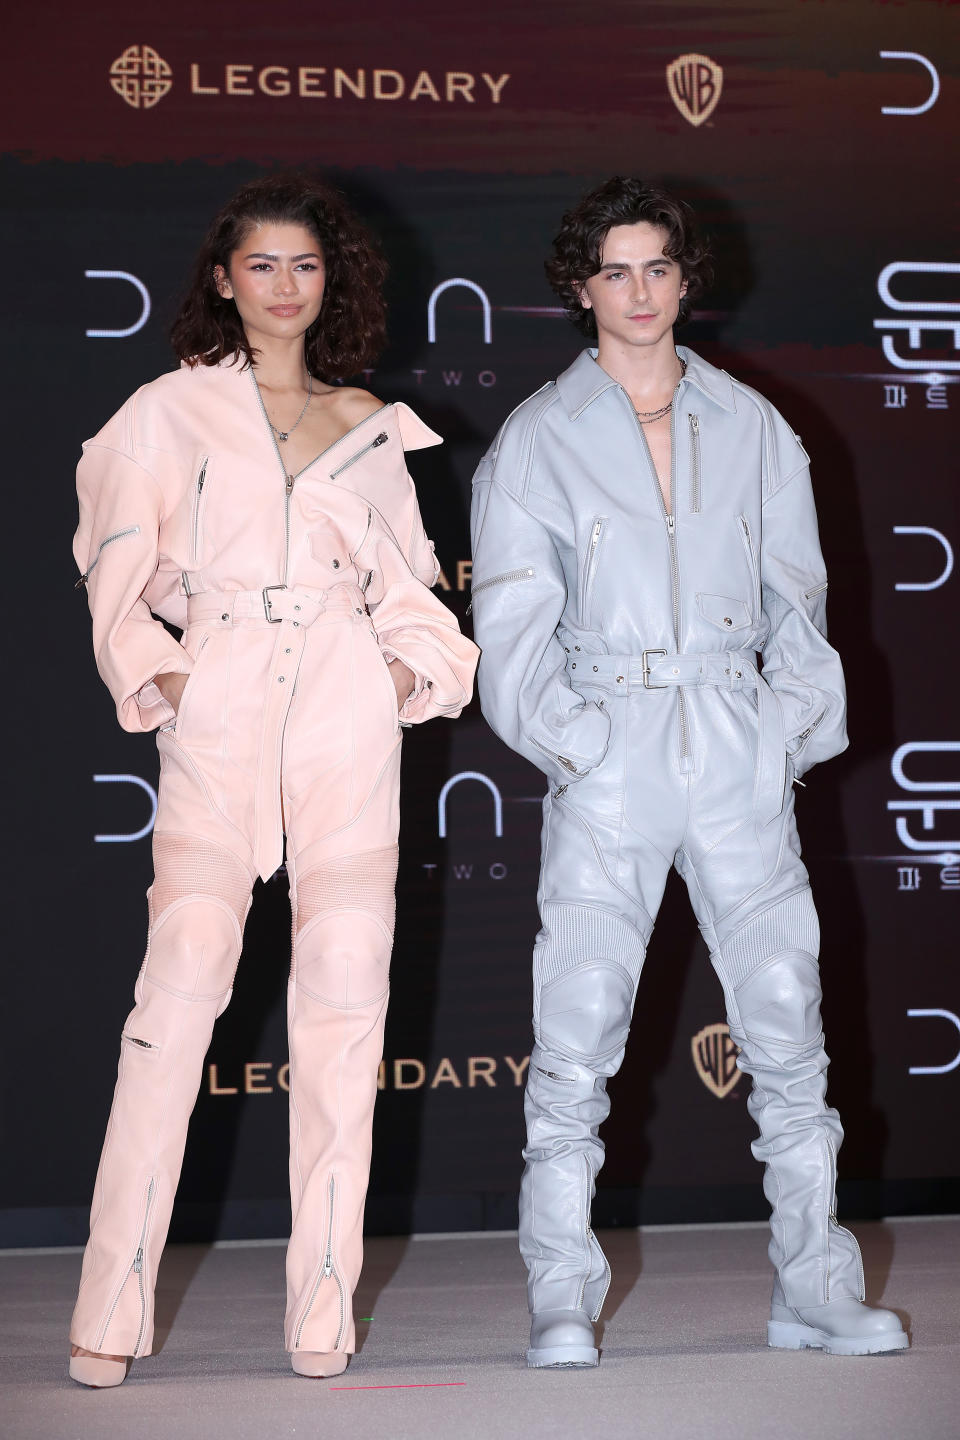 Zendaya and Timothee Chalamet wearing matching leather jumpsuits in pink and blue respectively